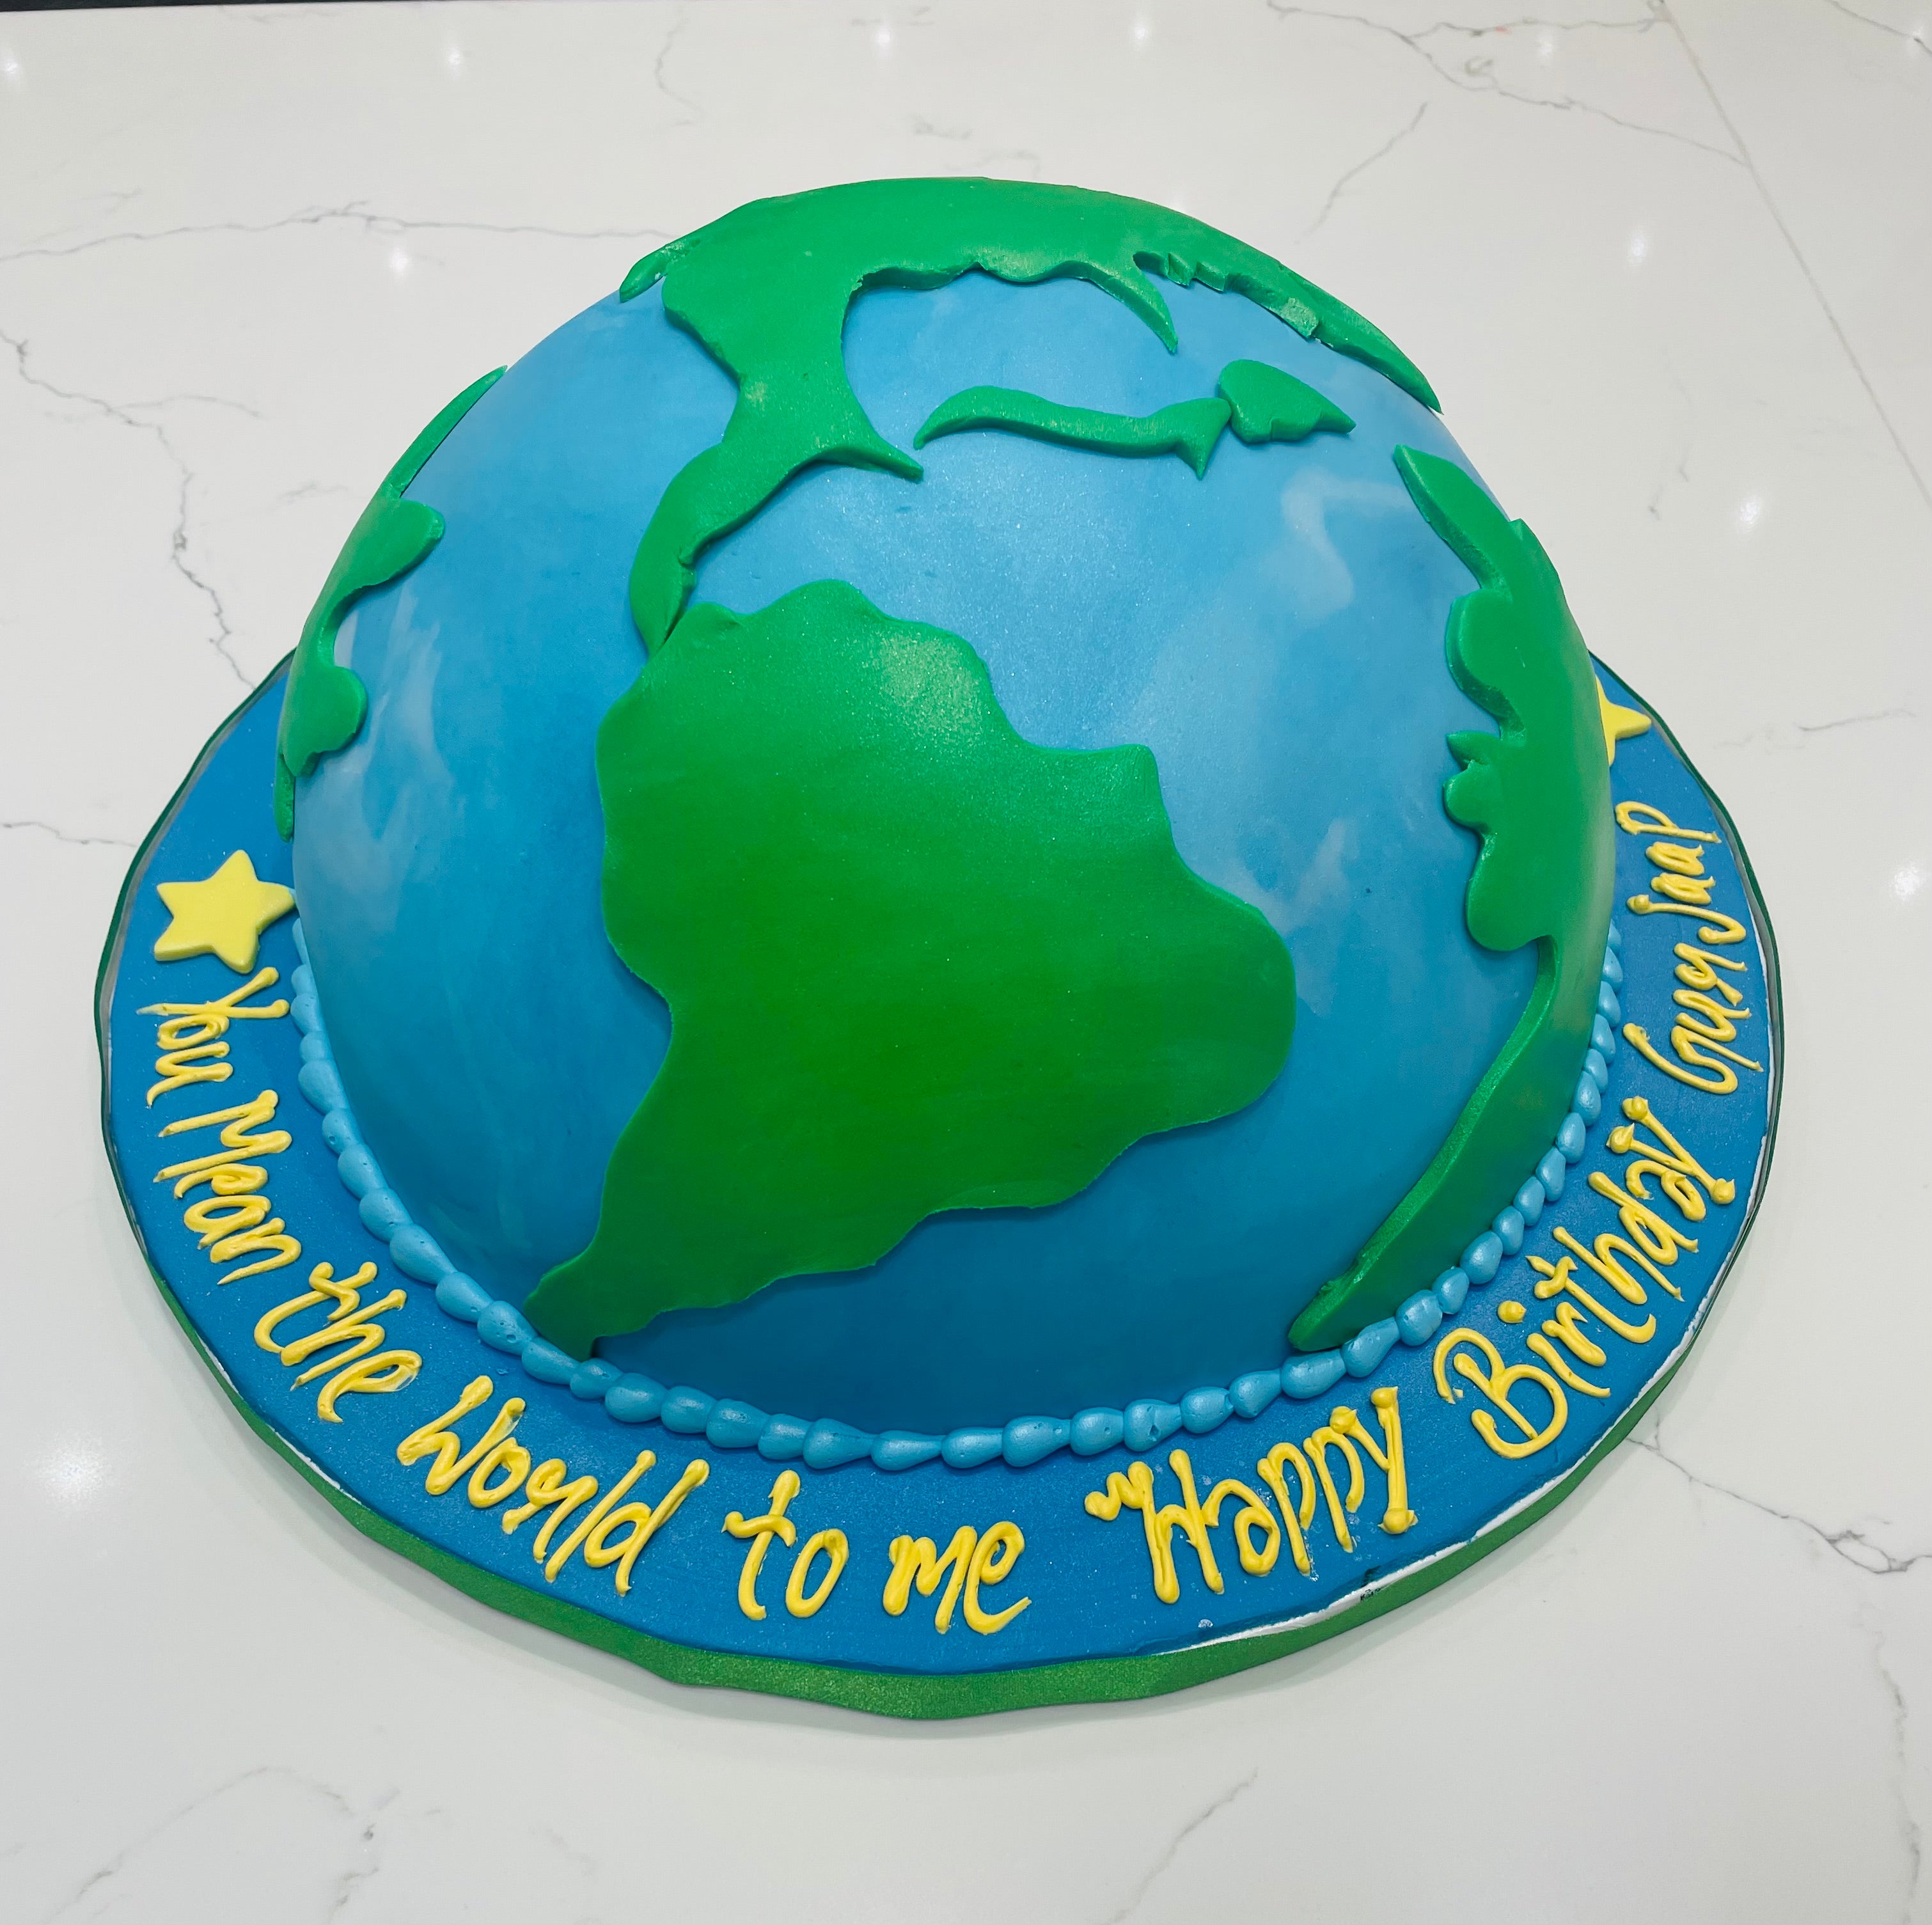 Celebrated by WWF International Staff in 2013 / THE Earth Hour cake By Liz  Schmid